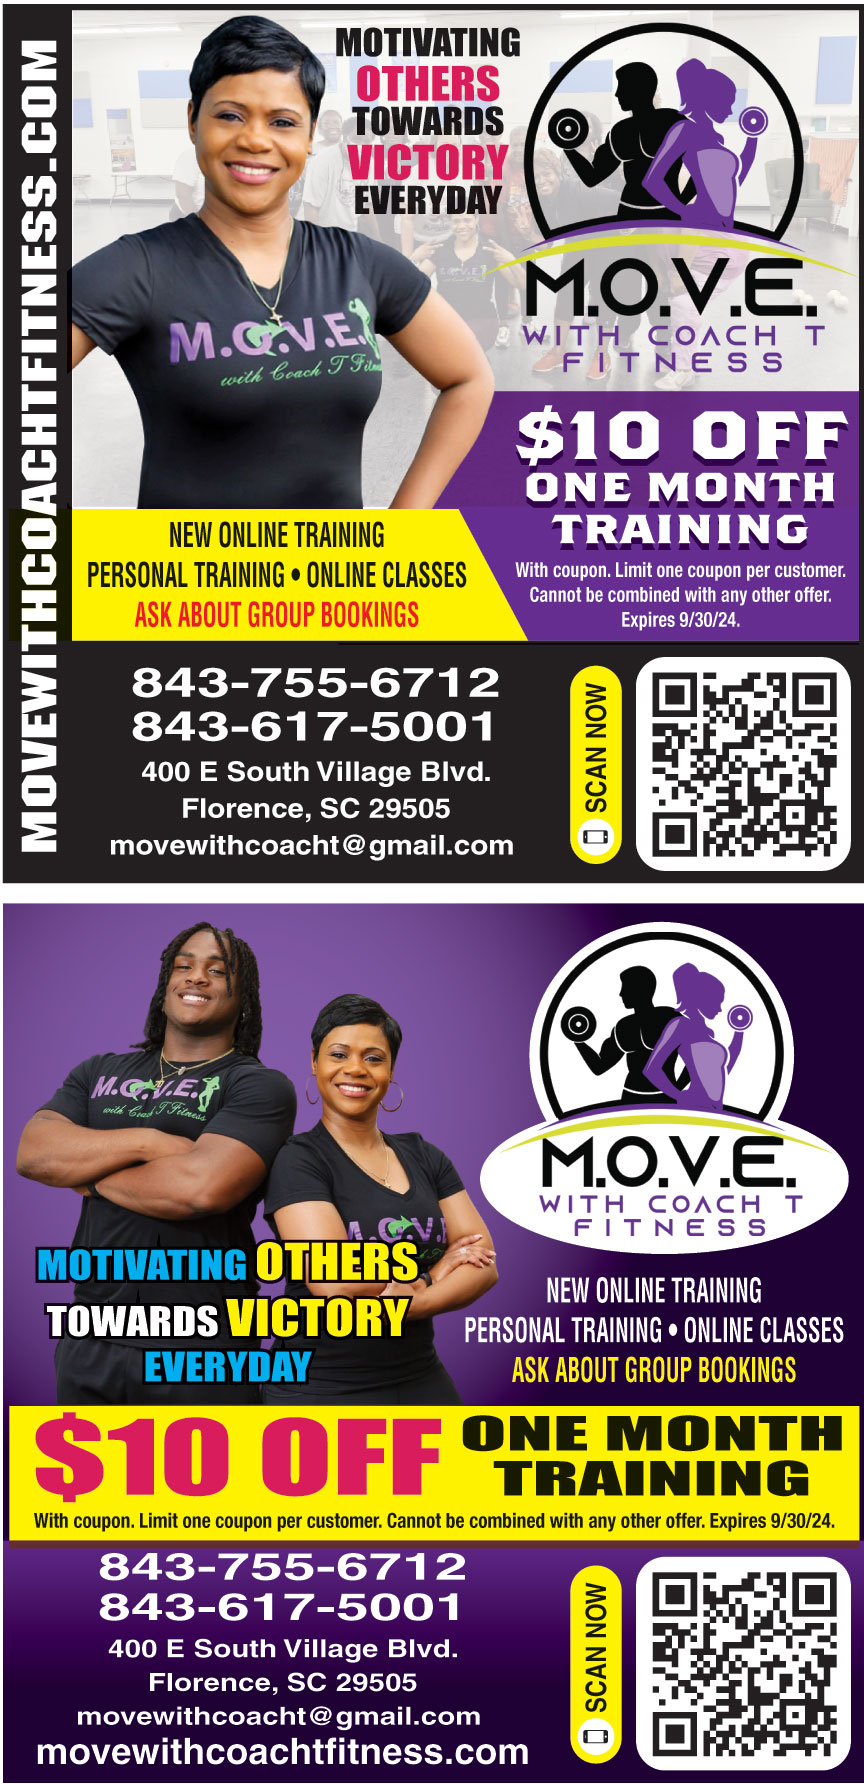 MOVE WITH COACH T